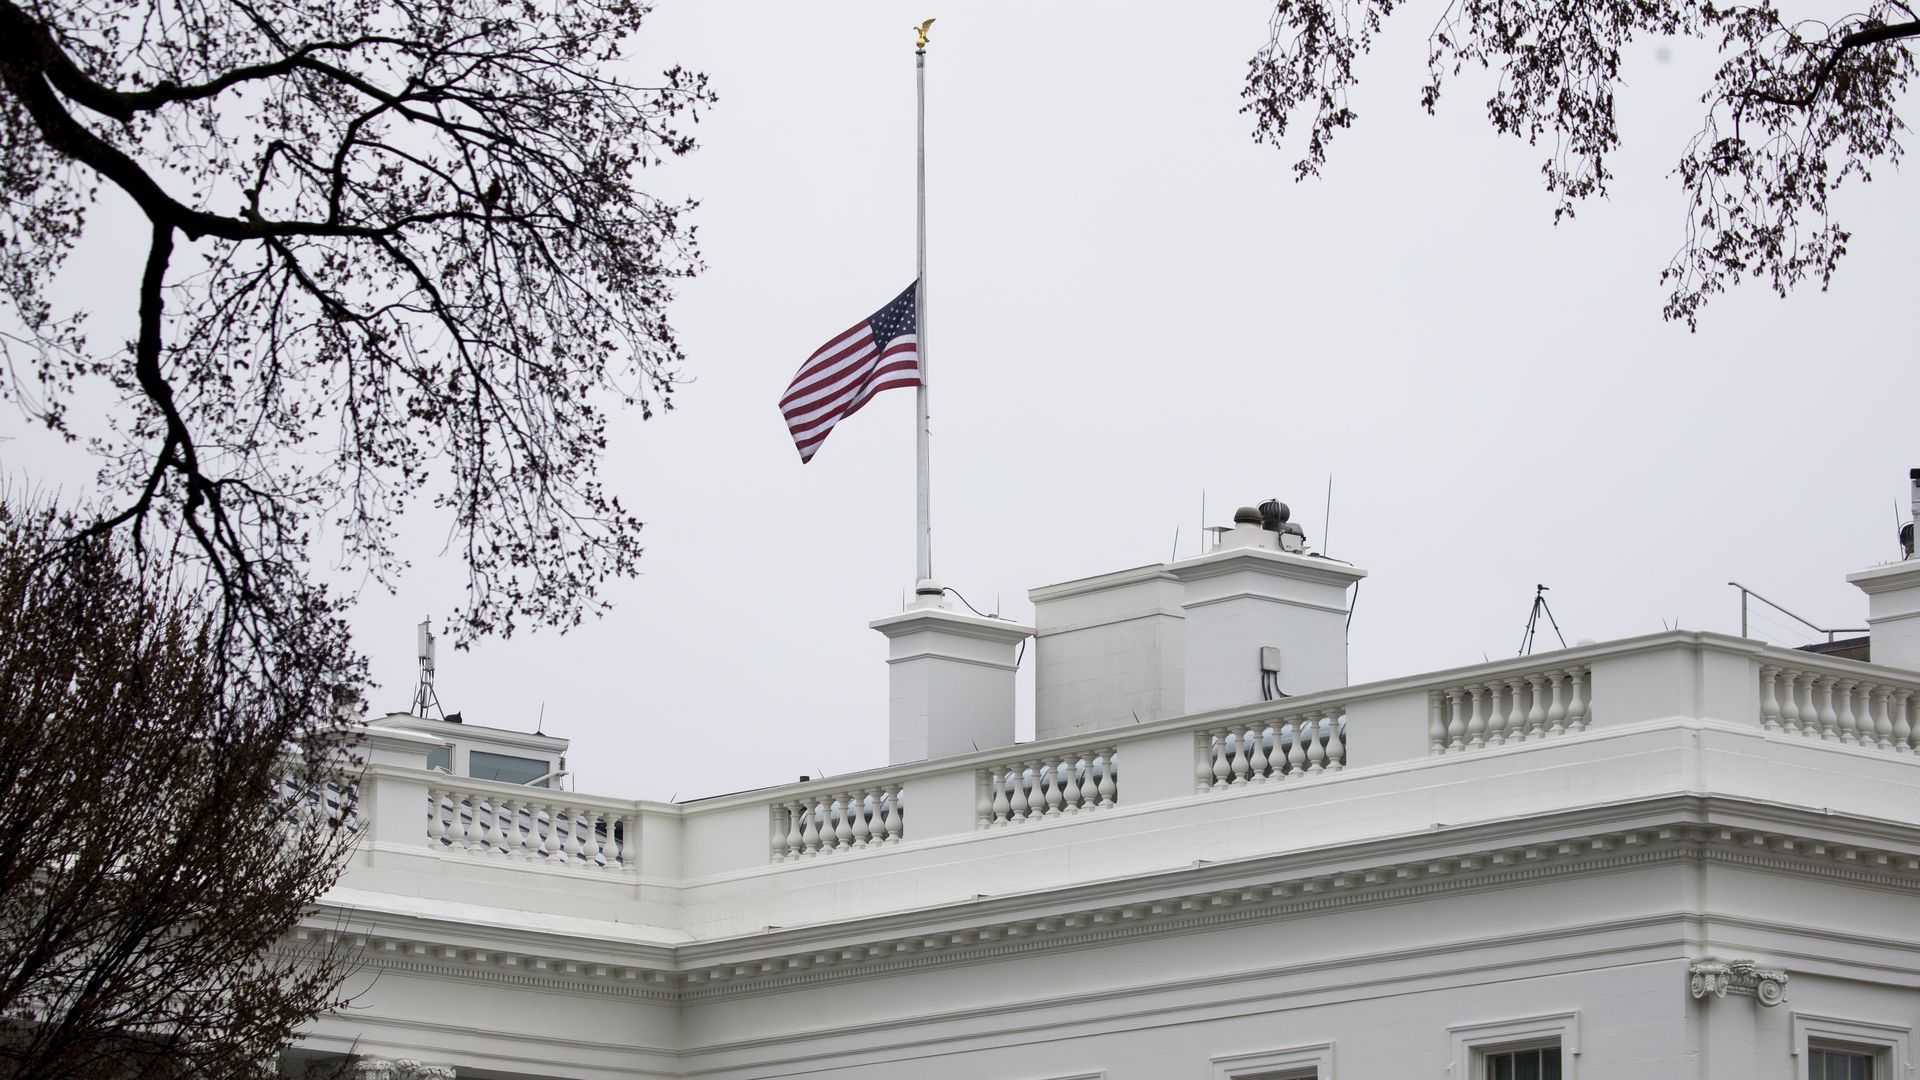 Picture of a flag flying at half-staff over the White House to honor the Atlanta victims